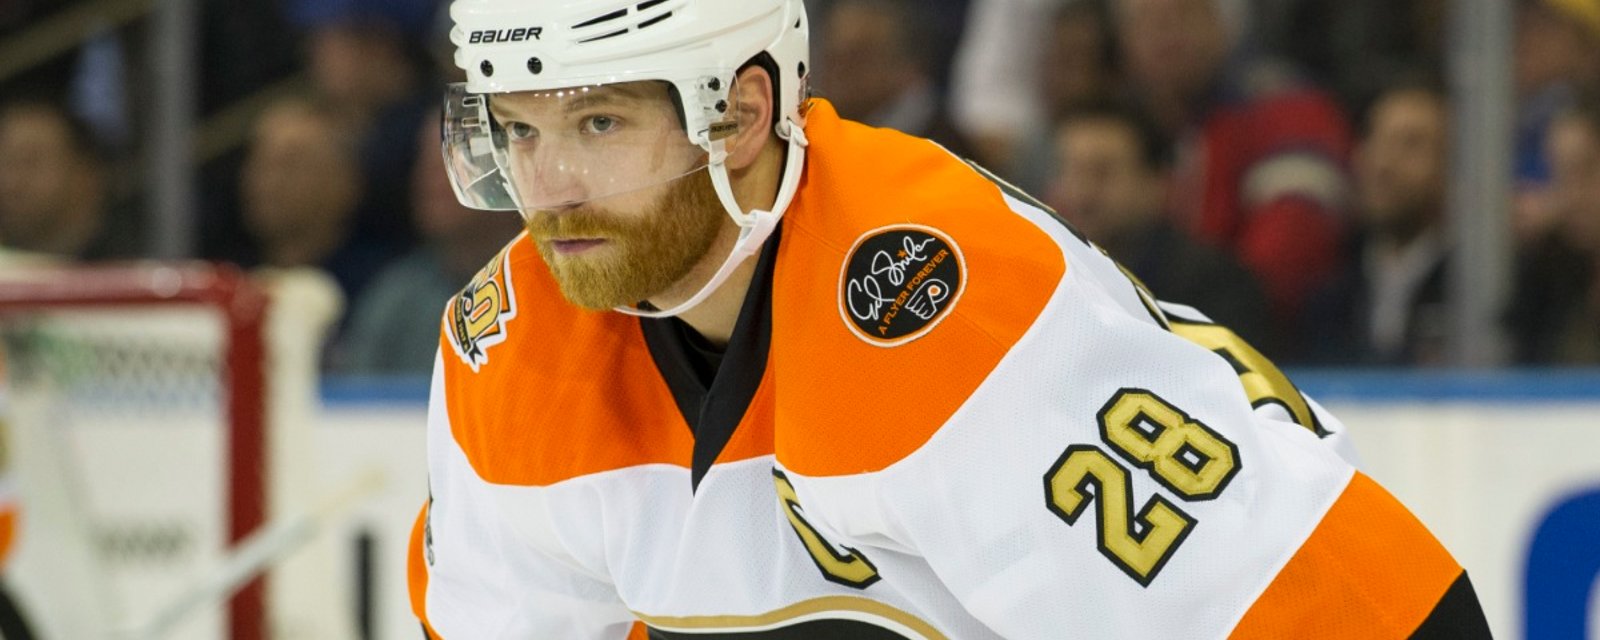 Flyers' captain takes full responsibility for team's offensive woes.